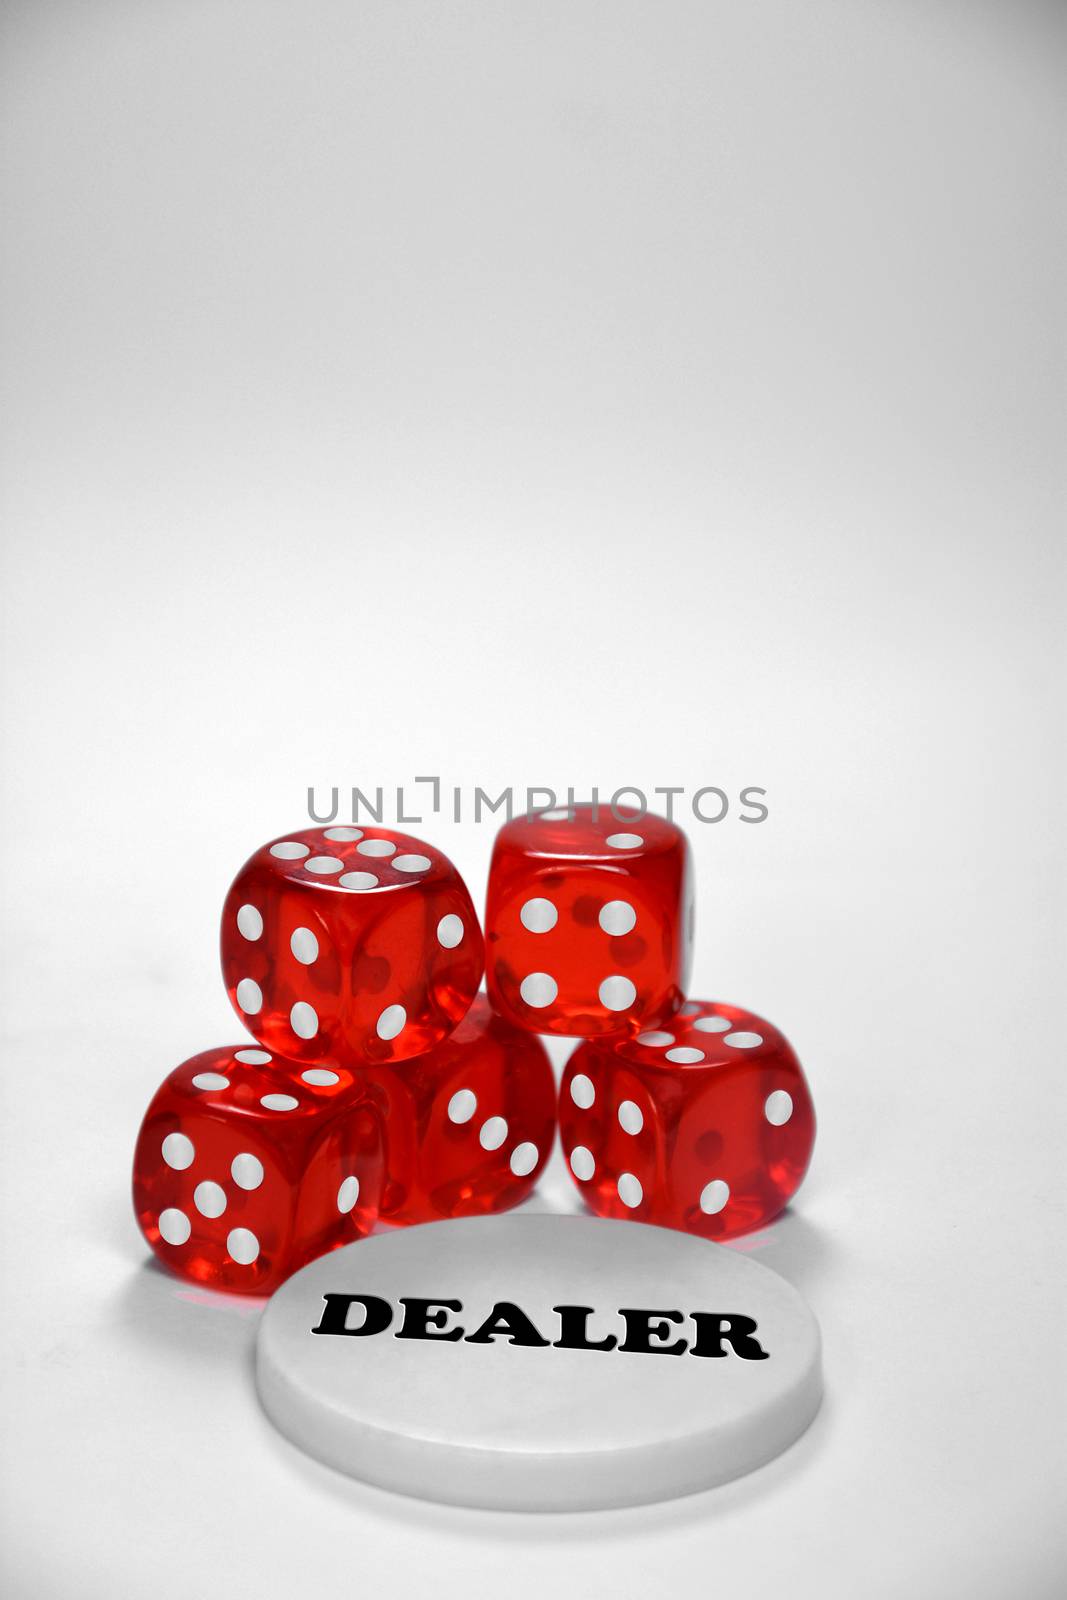 Poker chips, dices and a dealer button, isolated on white. Mainly used for poker..